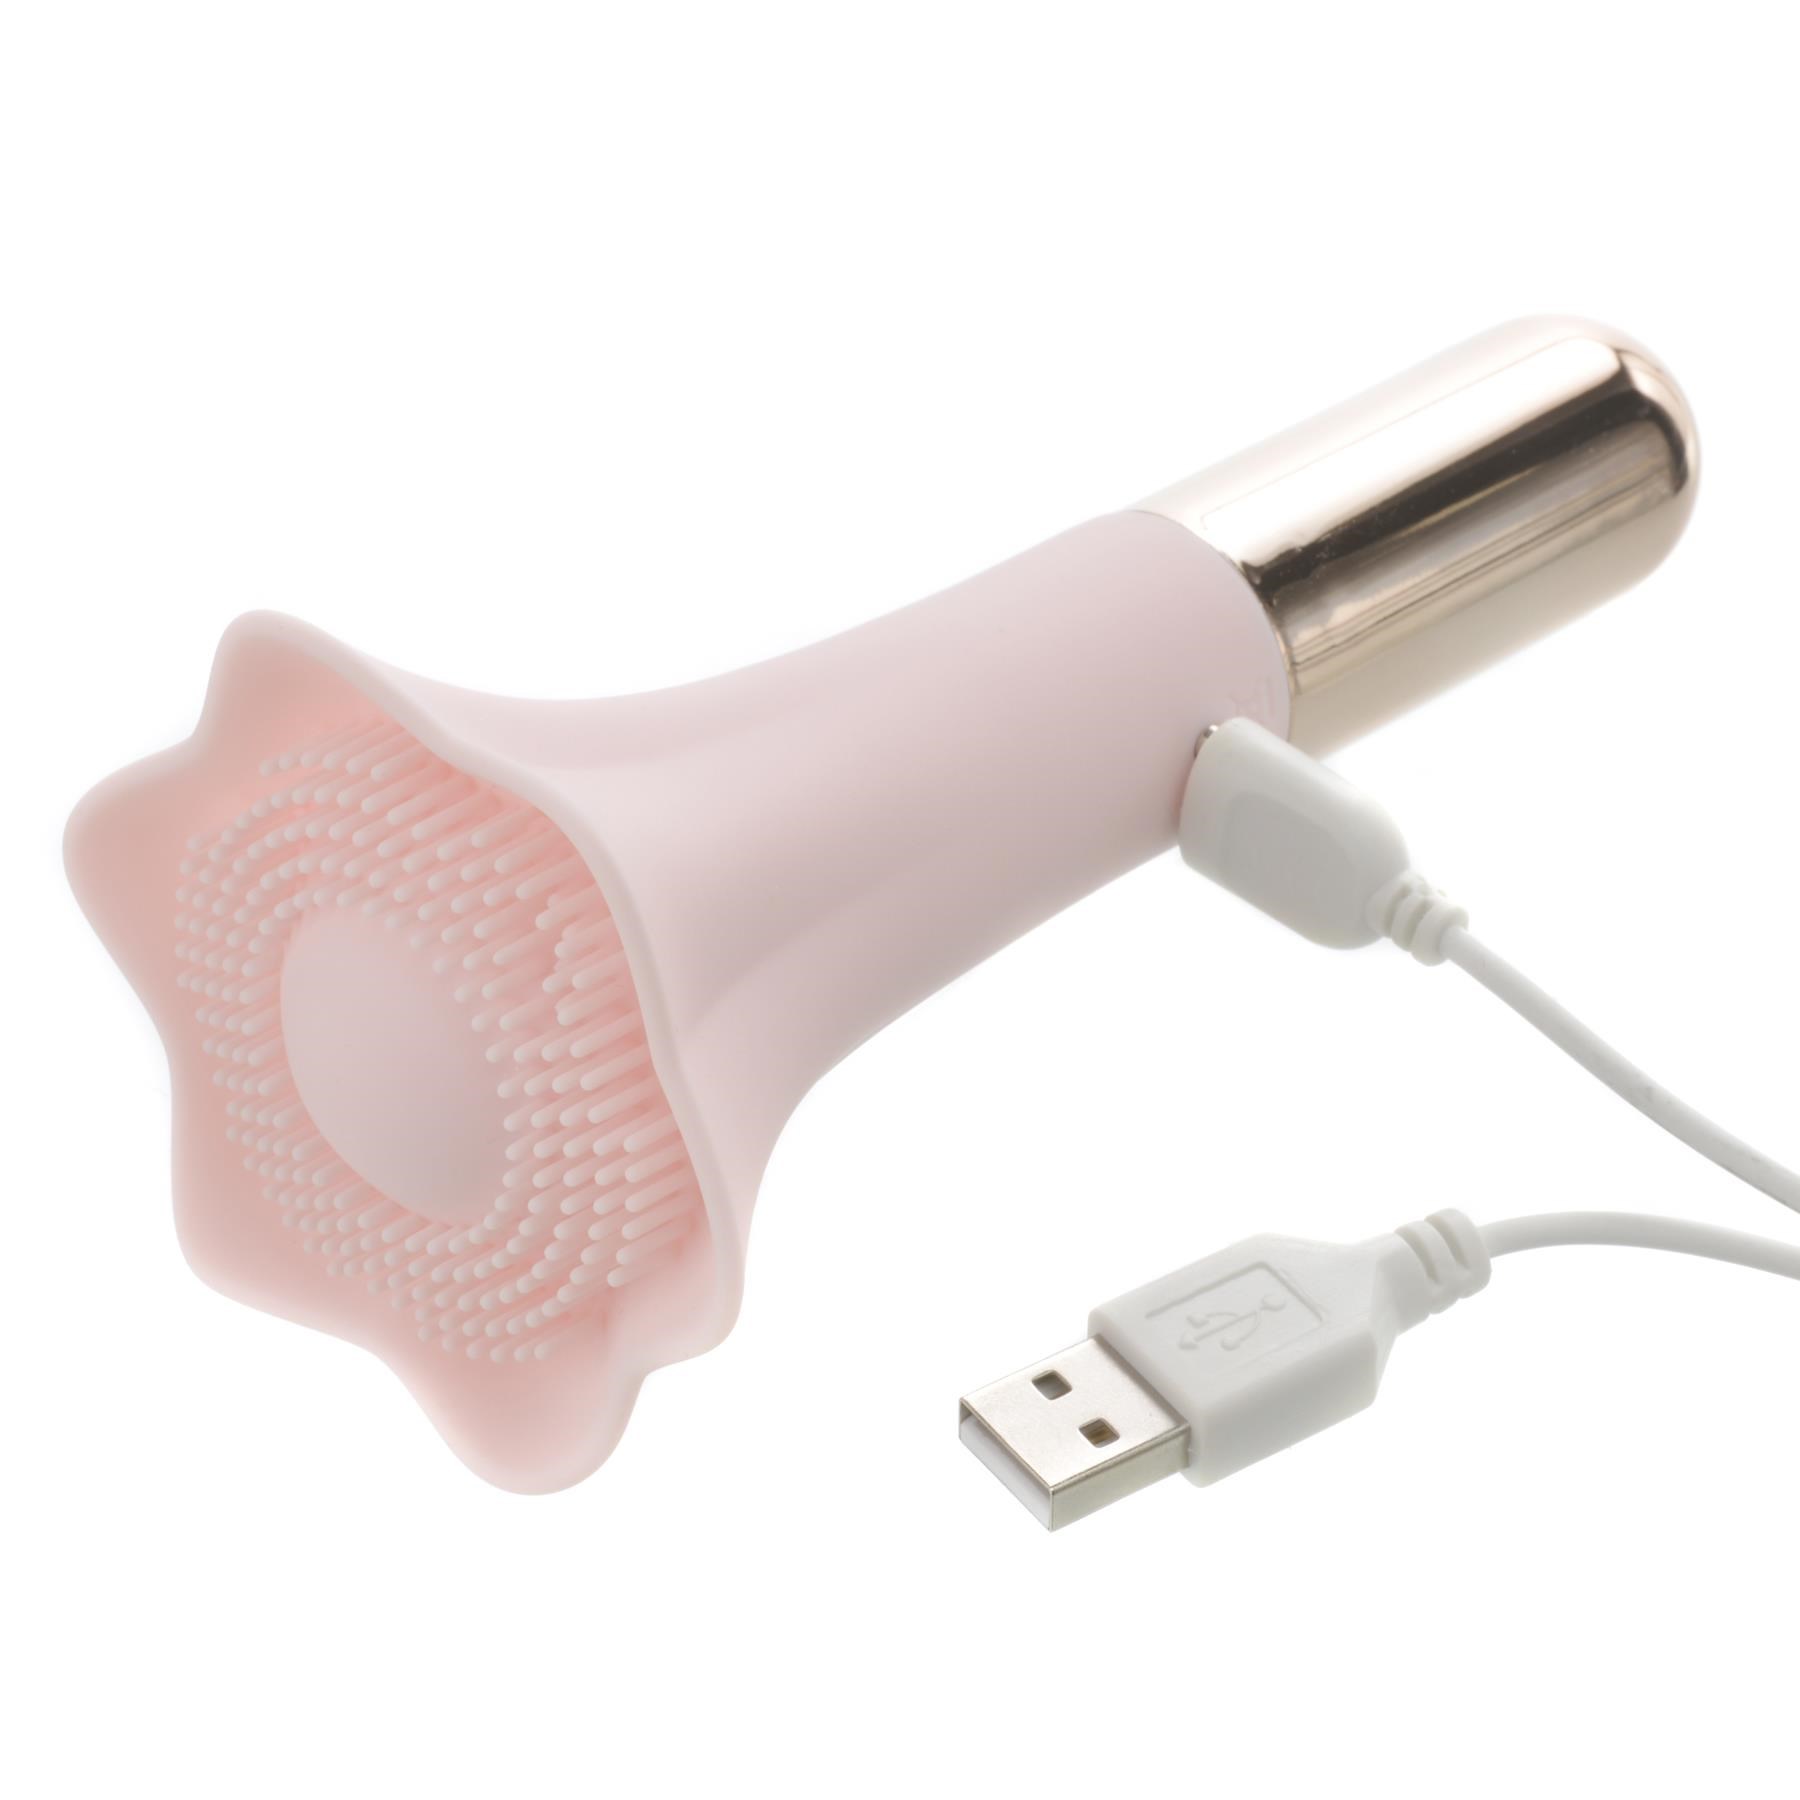 Goddess Pink Lily Massager - Showing Where Charging Cable is Placed